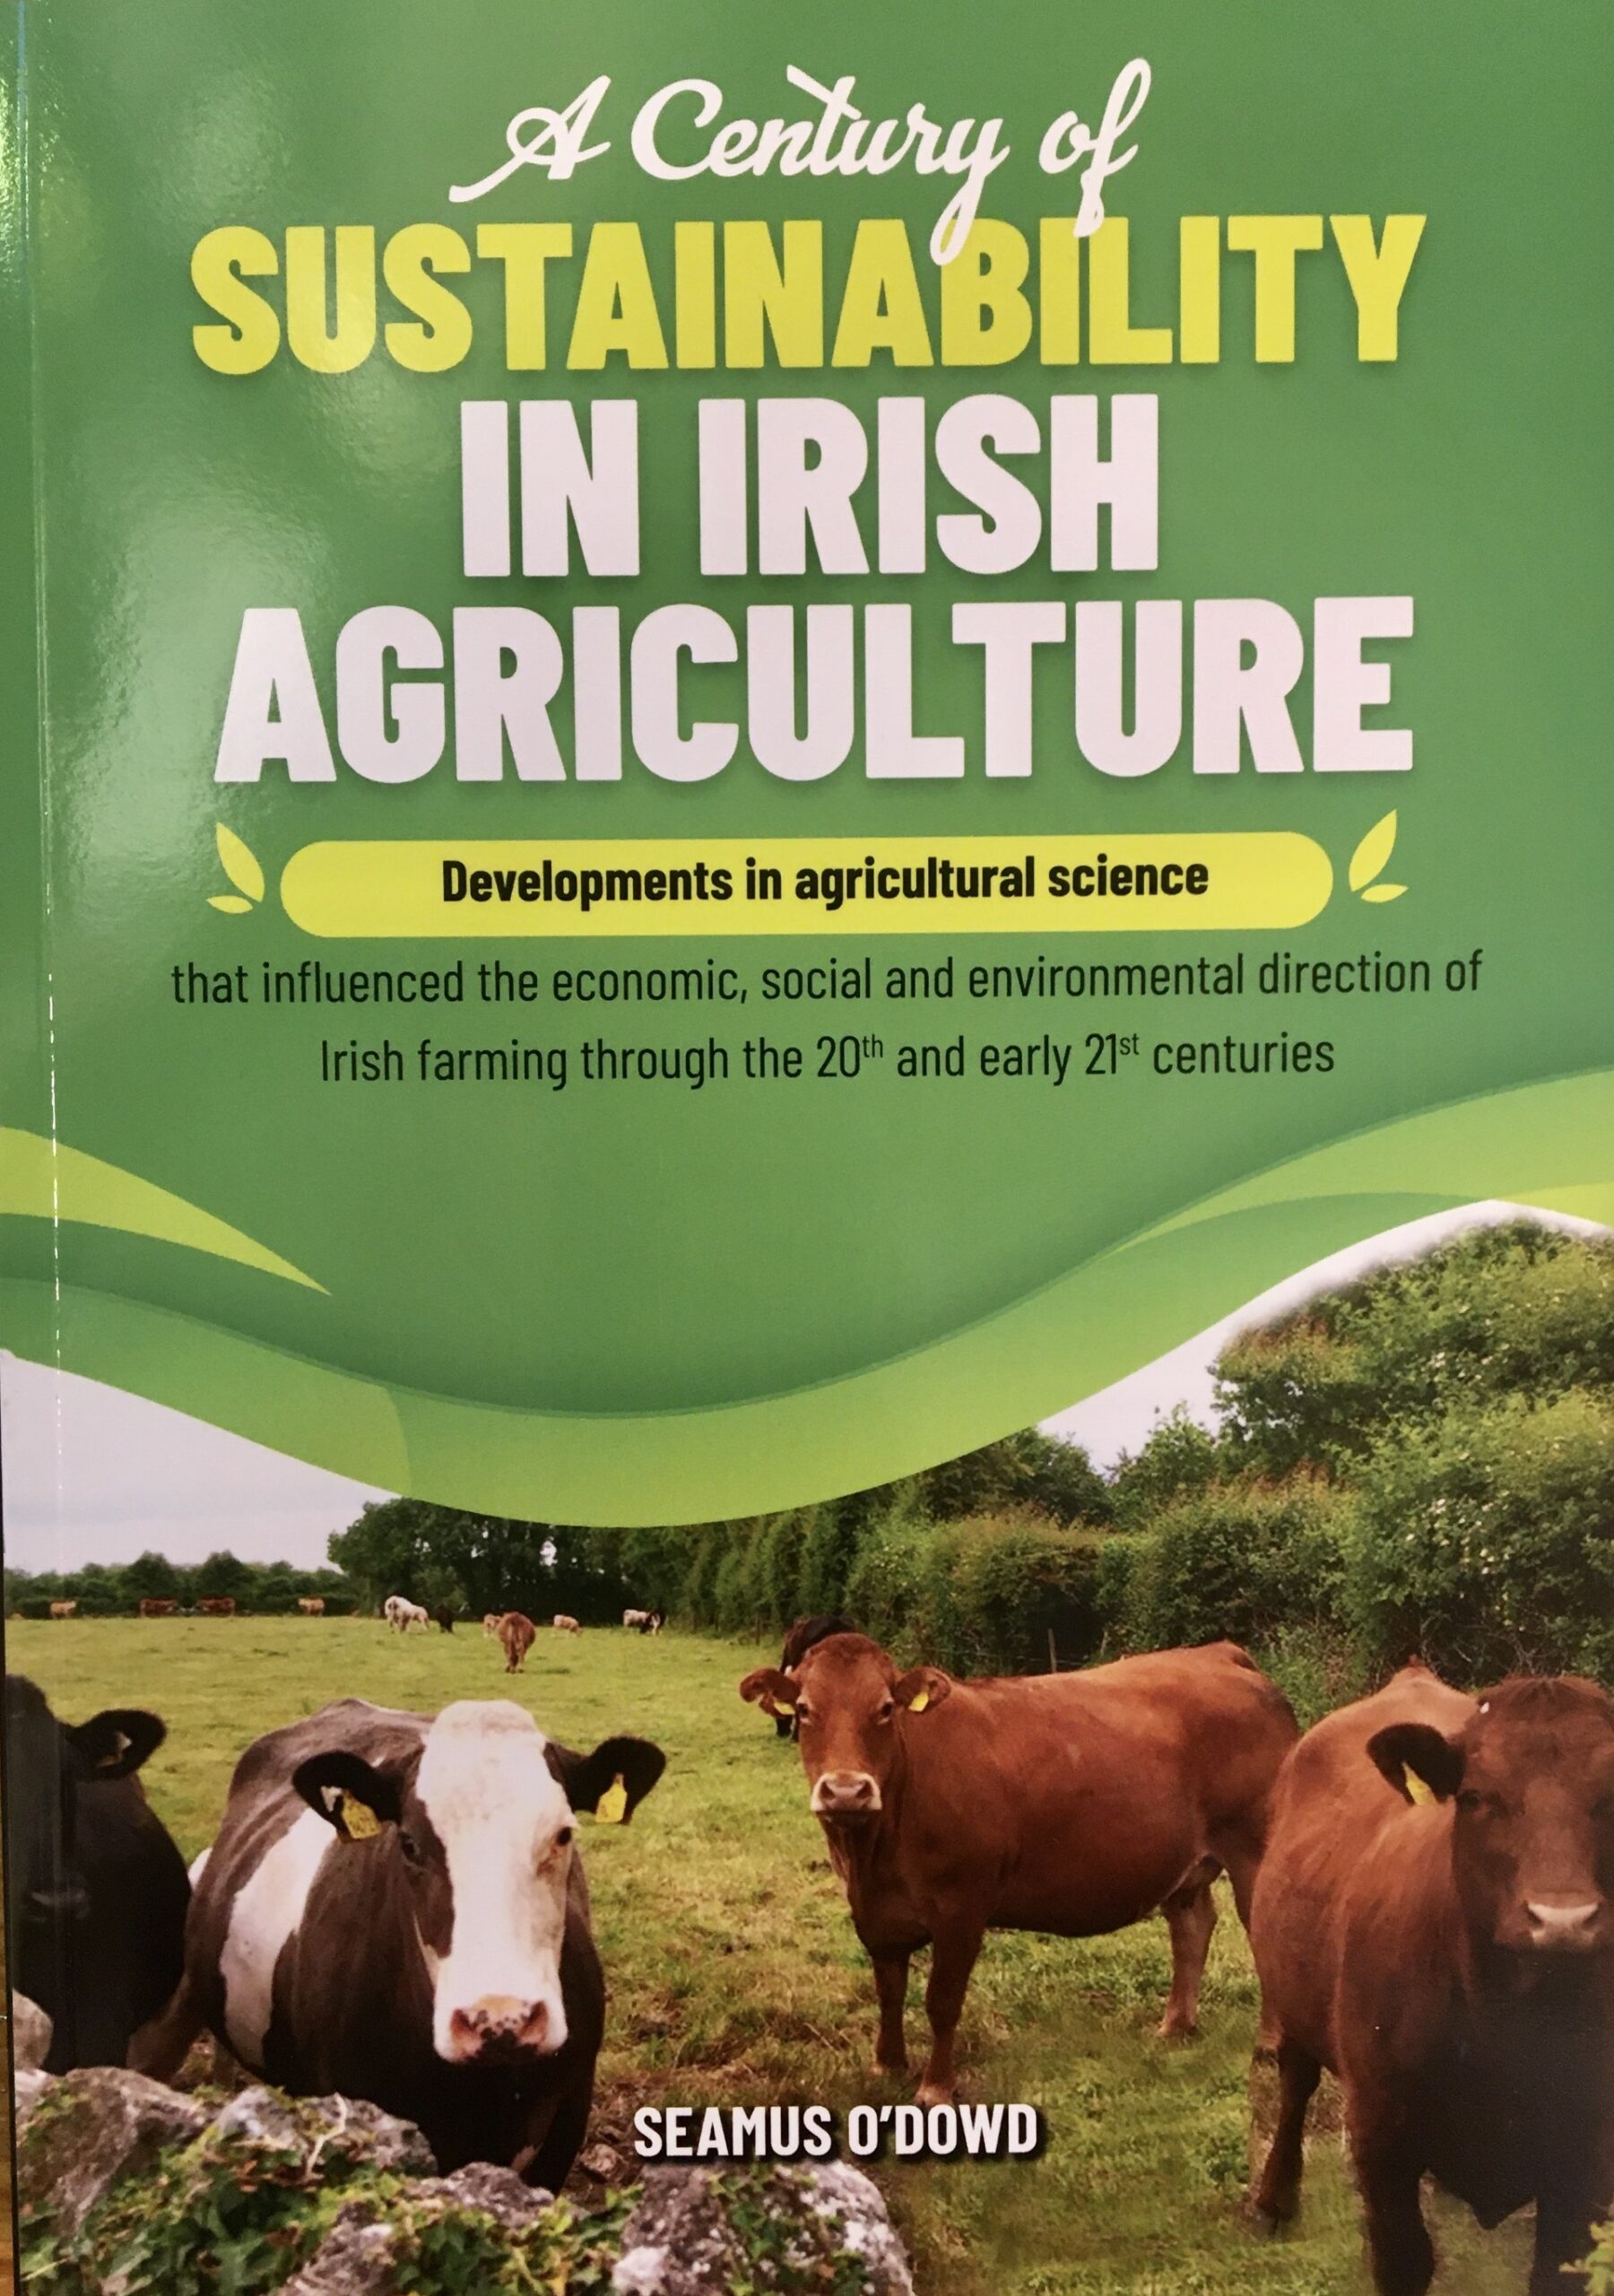 A Century of Sustainability in Irish Agriculture by Seamus O'Dowd